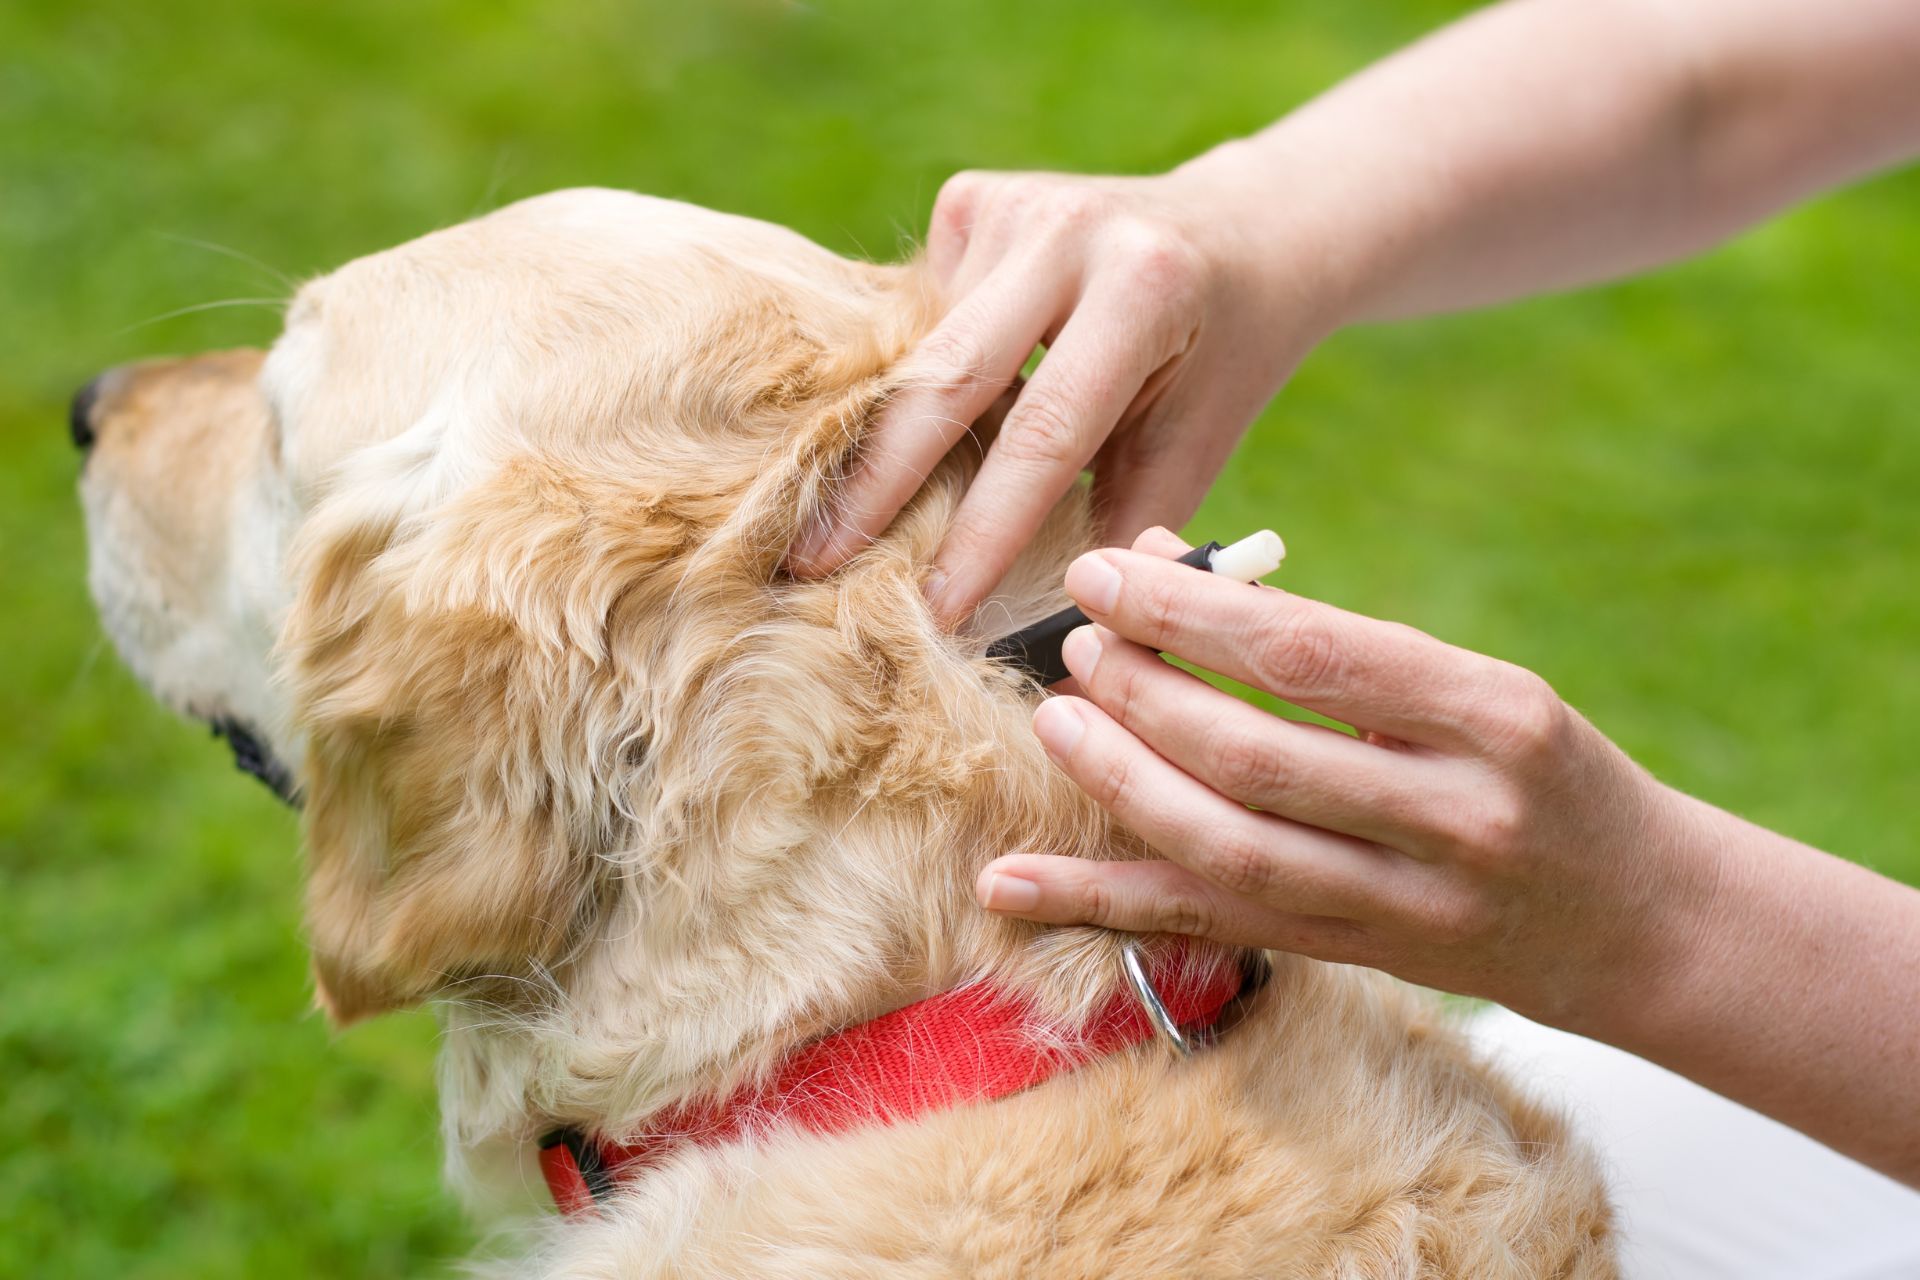 a person applying medicines on dog's head